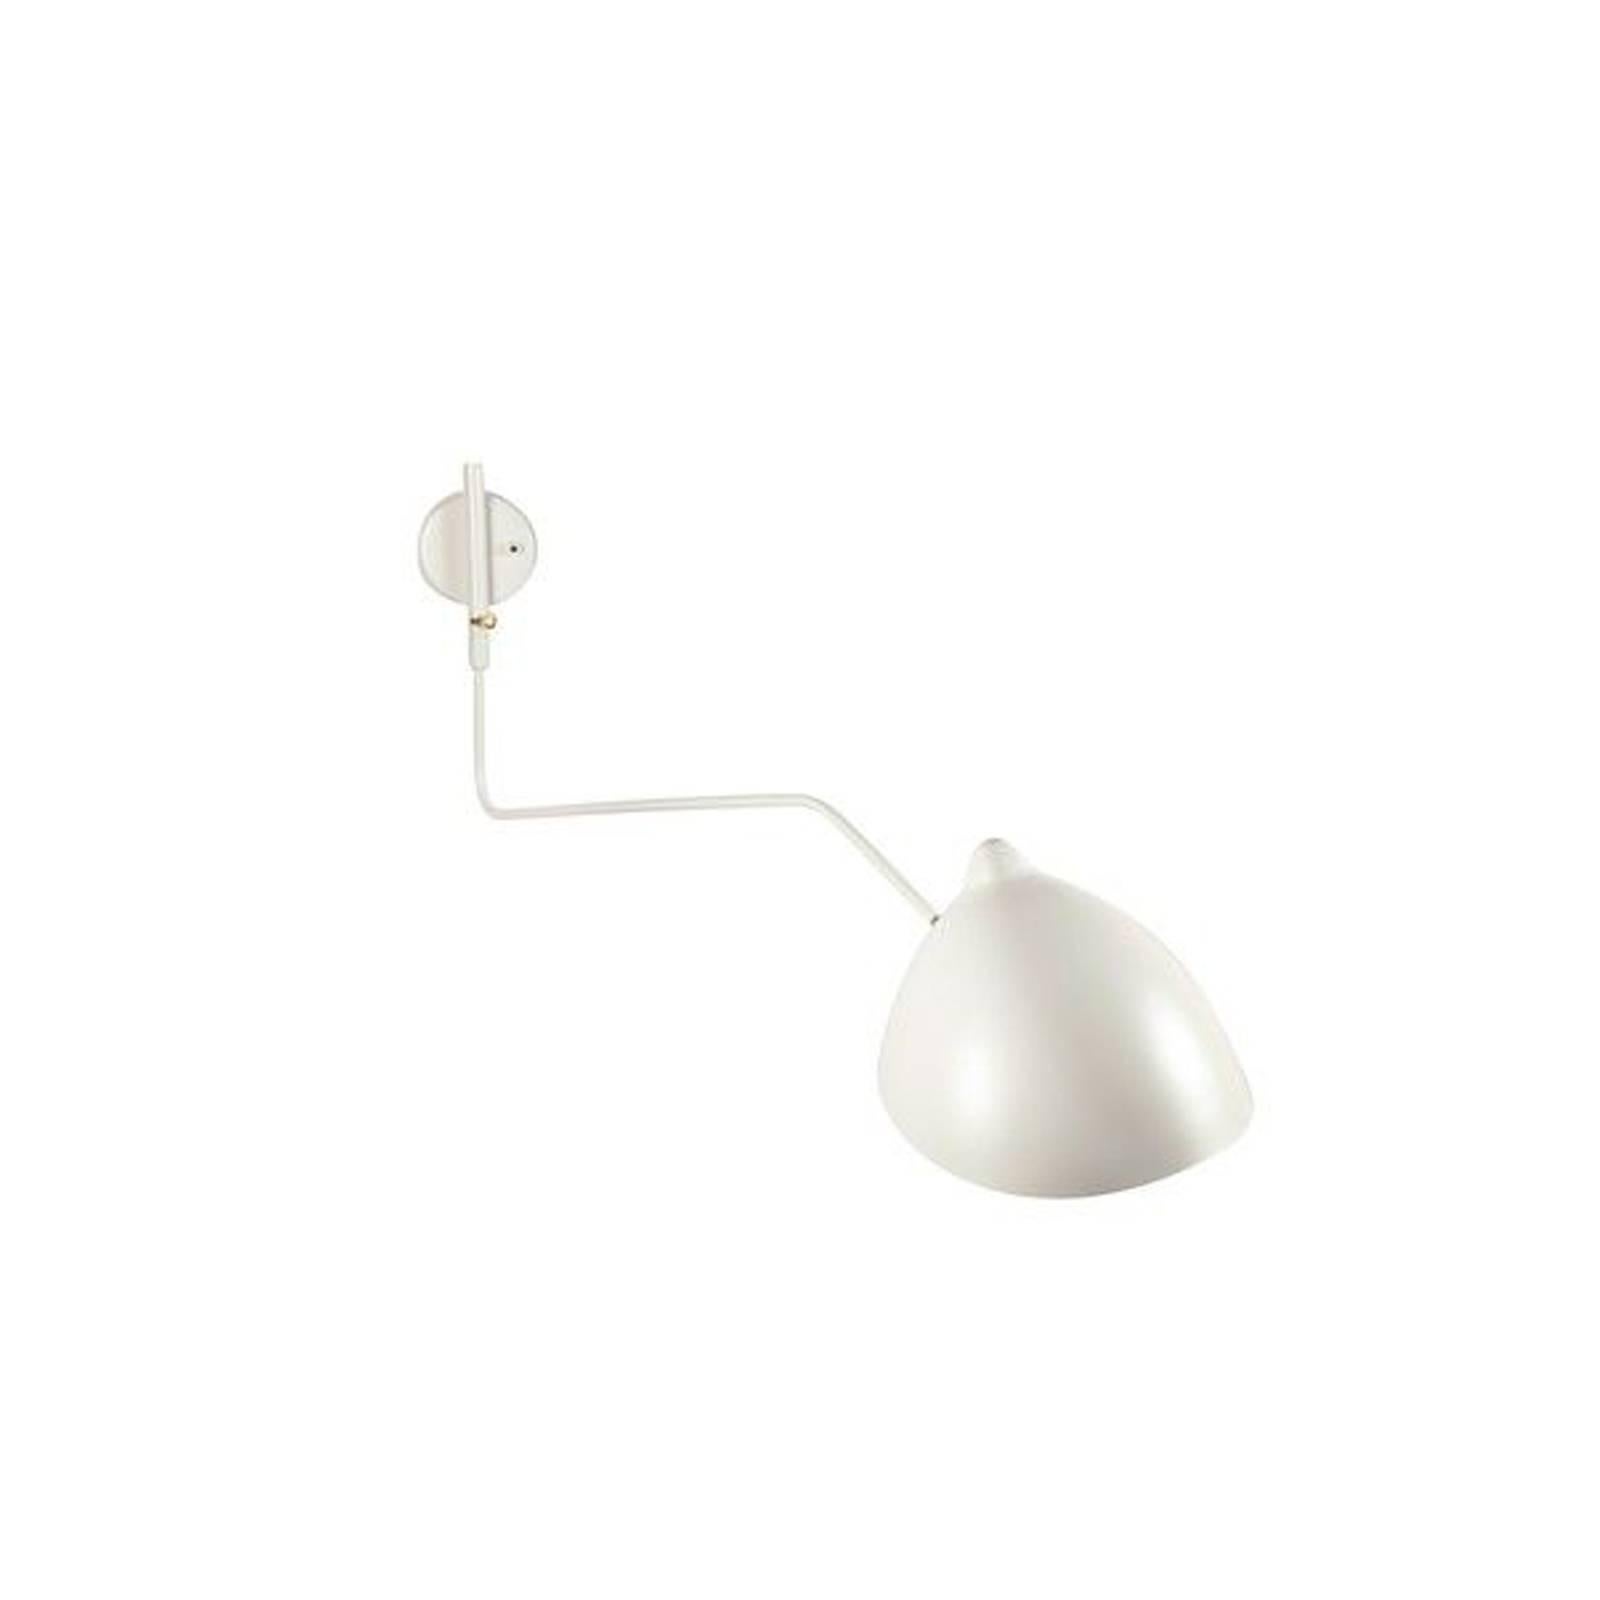 Pair of white wall lamps mounted on thin carbonized steel arms with a full range of swing from side to side. The bulb is contained within a white metal shade that can swivel as well.